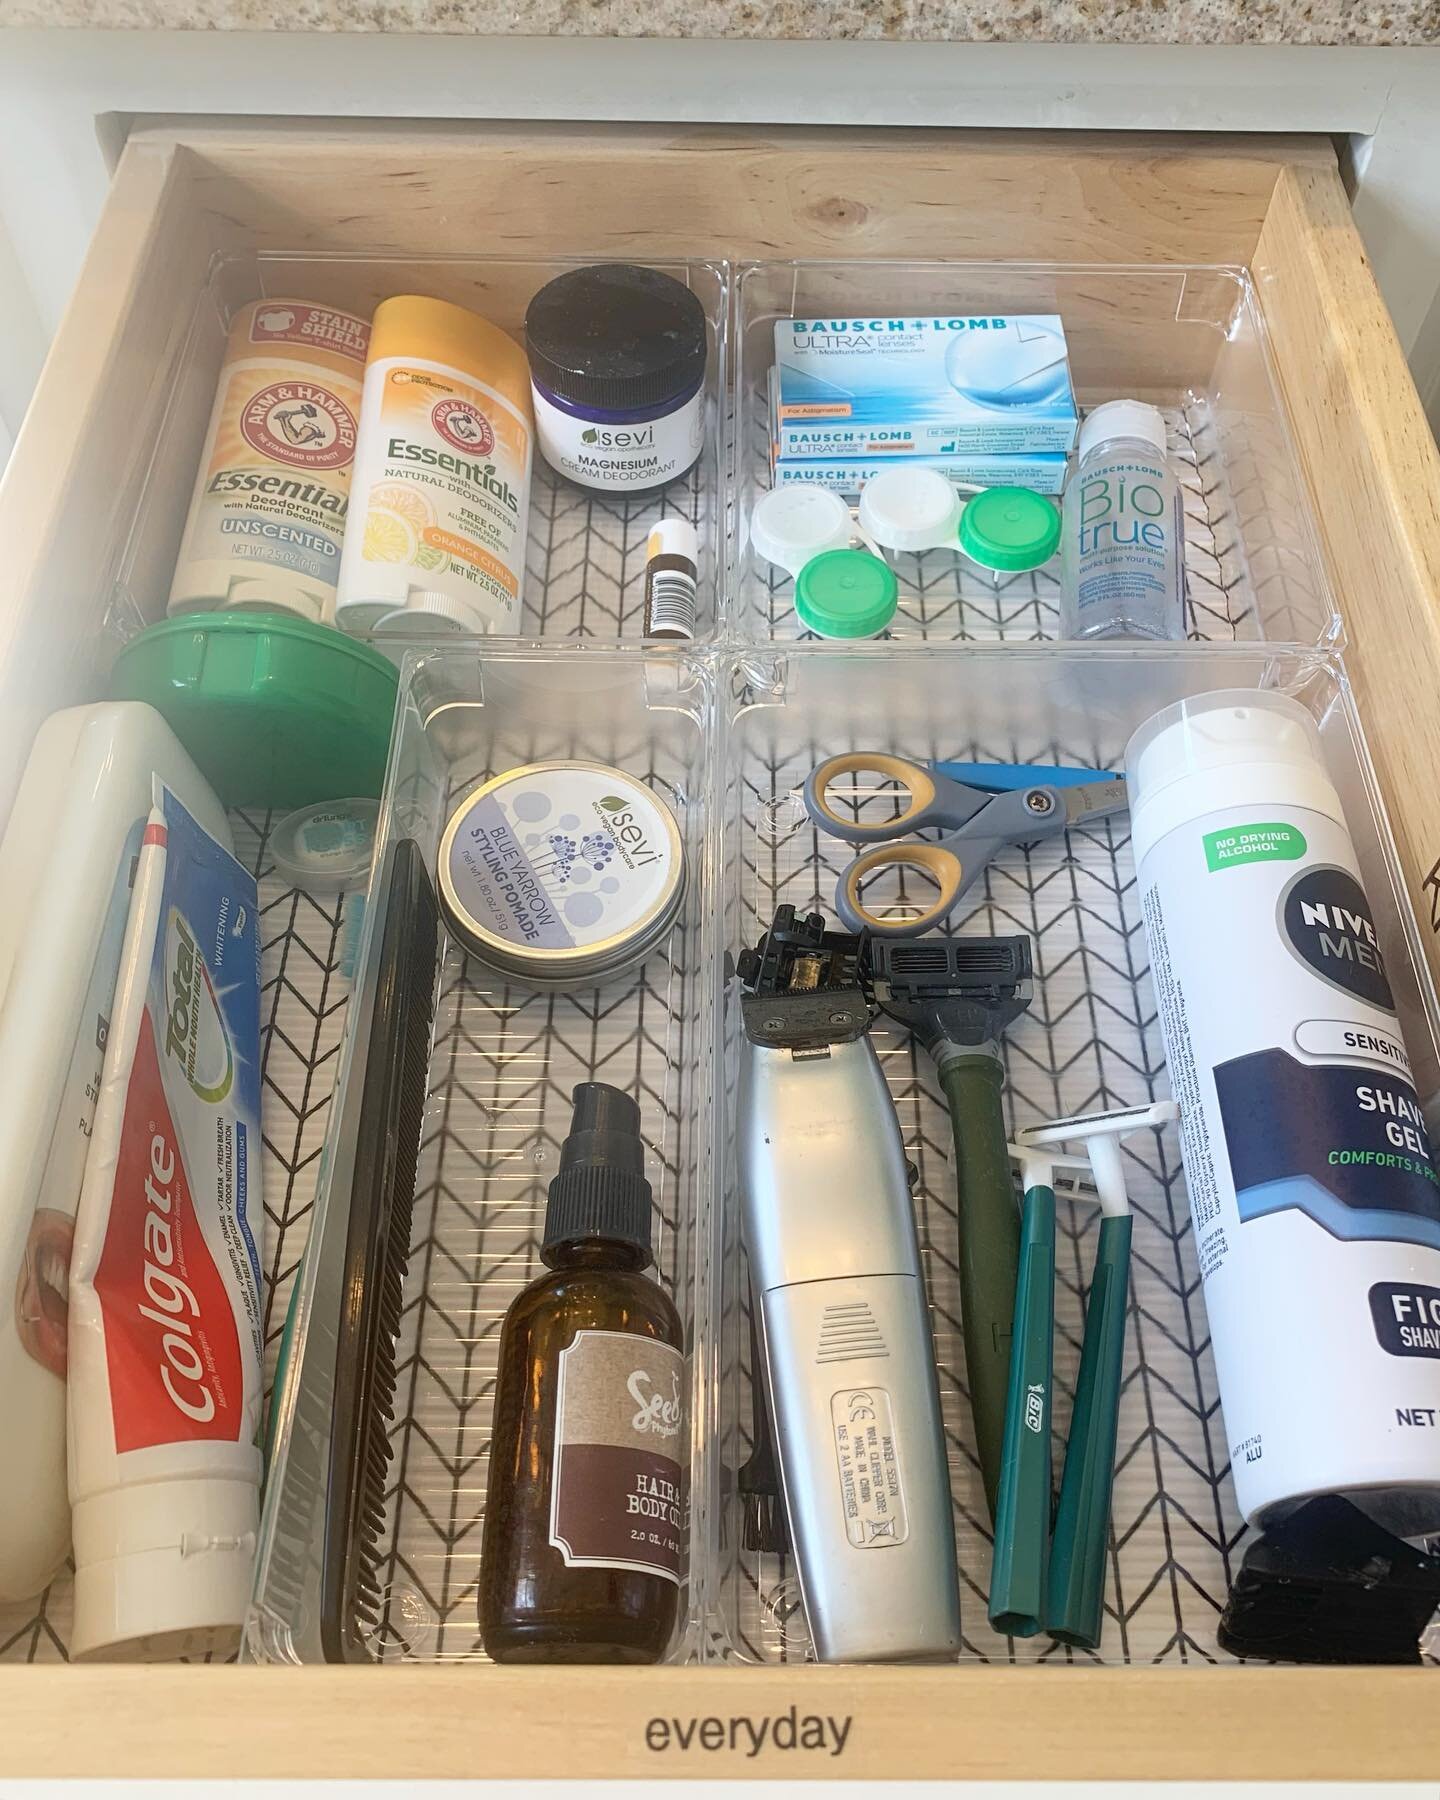 Ahhh&hellip;the feeling of having all your essentials right there waiting for you on a Monday morning!! ☀️
#morningroutine #simplify #declutter #homeorganizing #bathroomorganization #sparkjoy